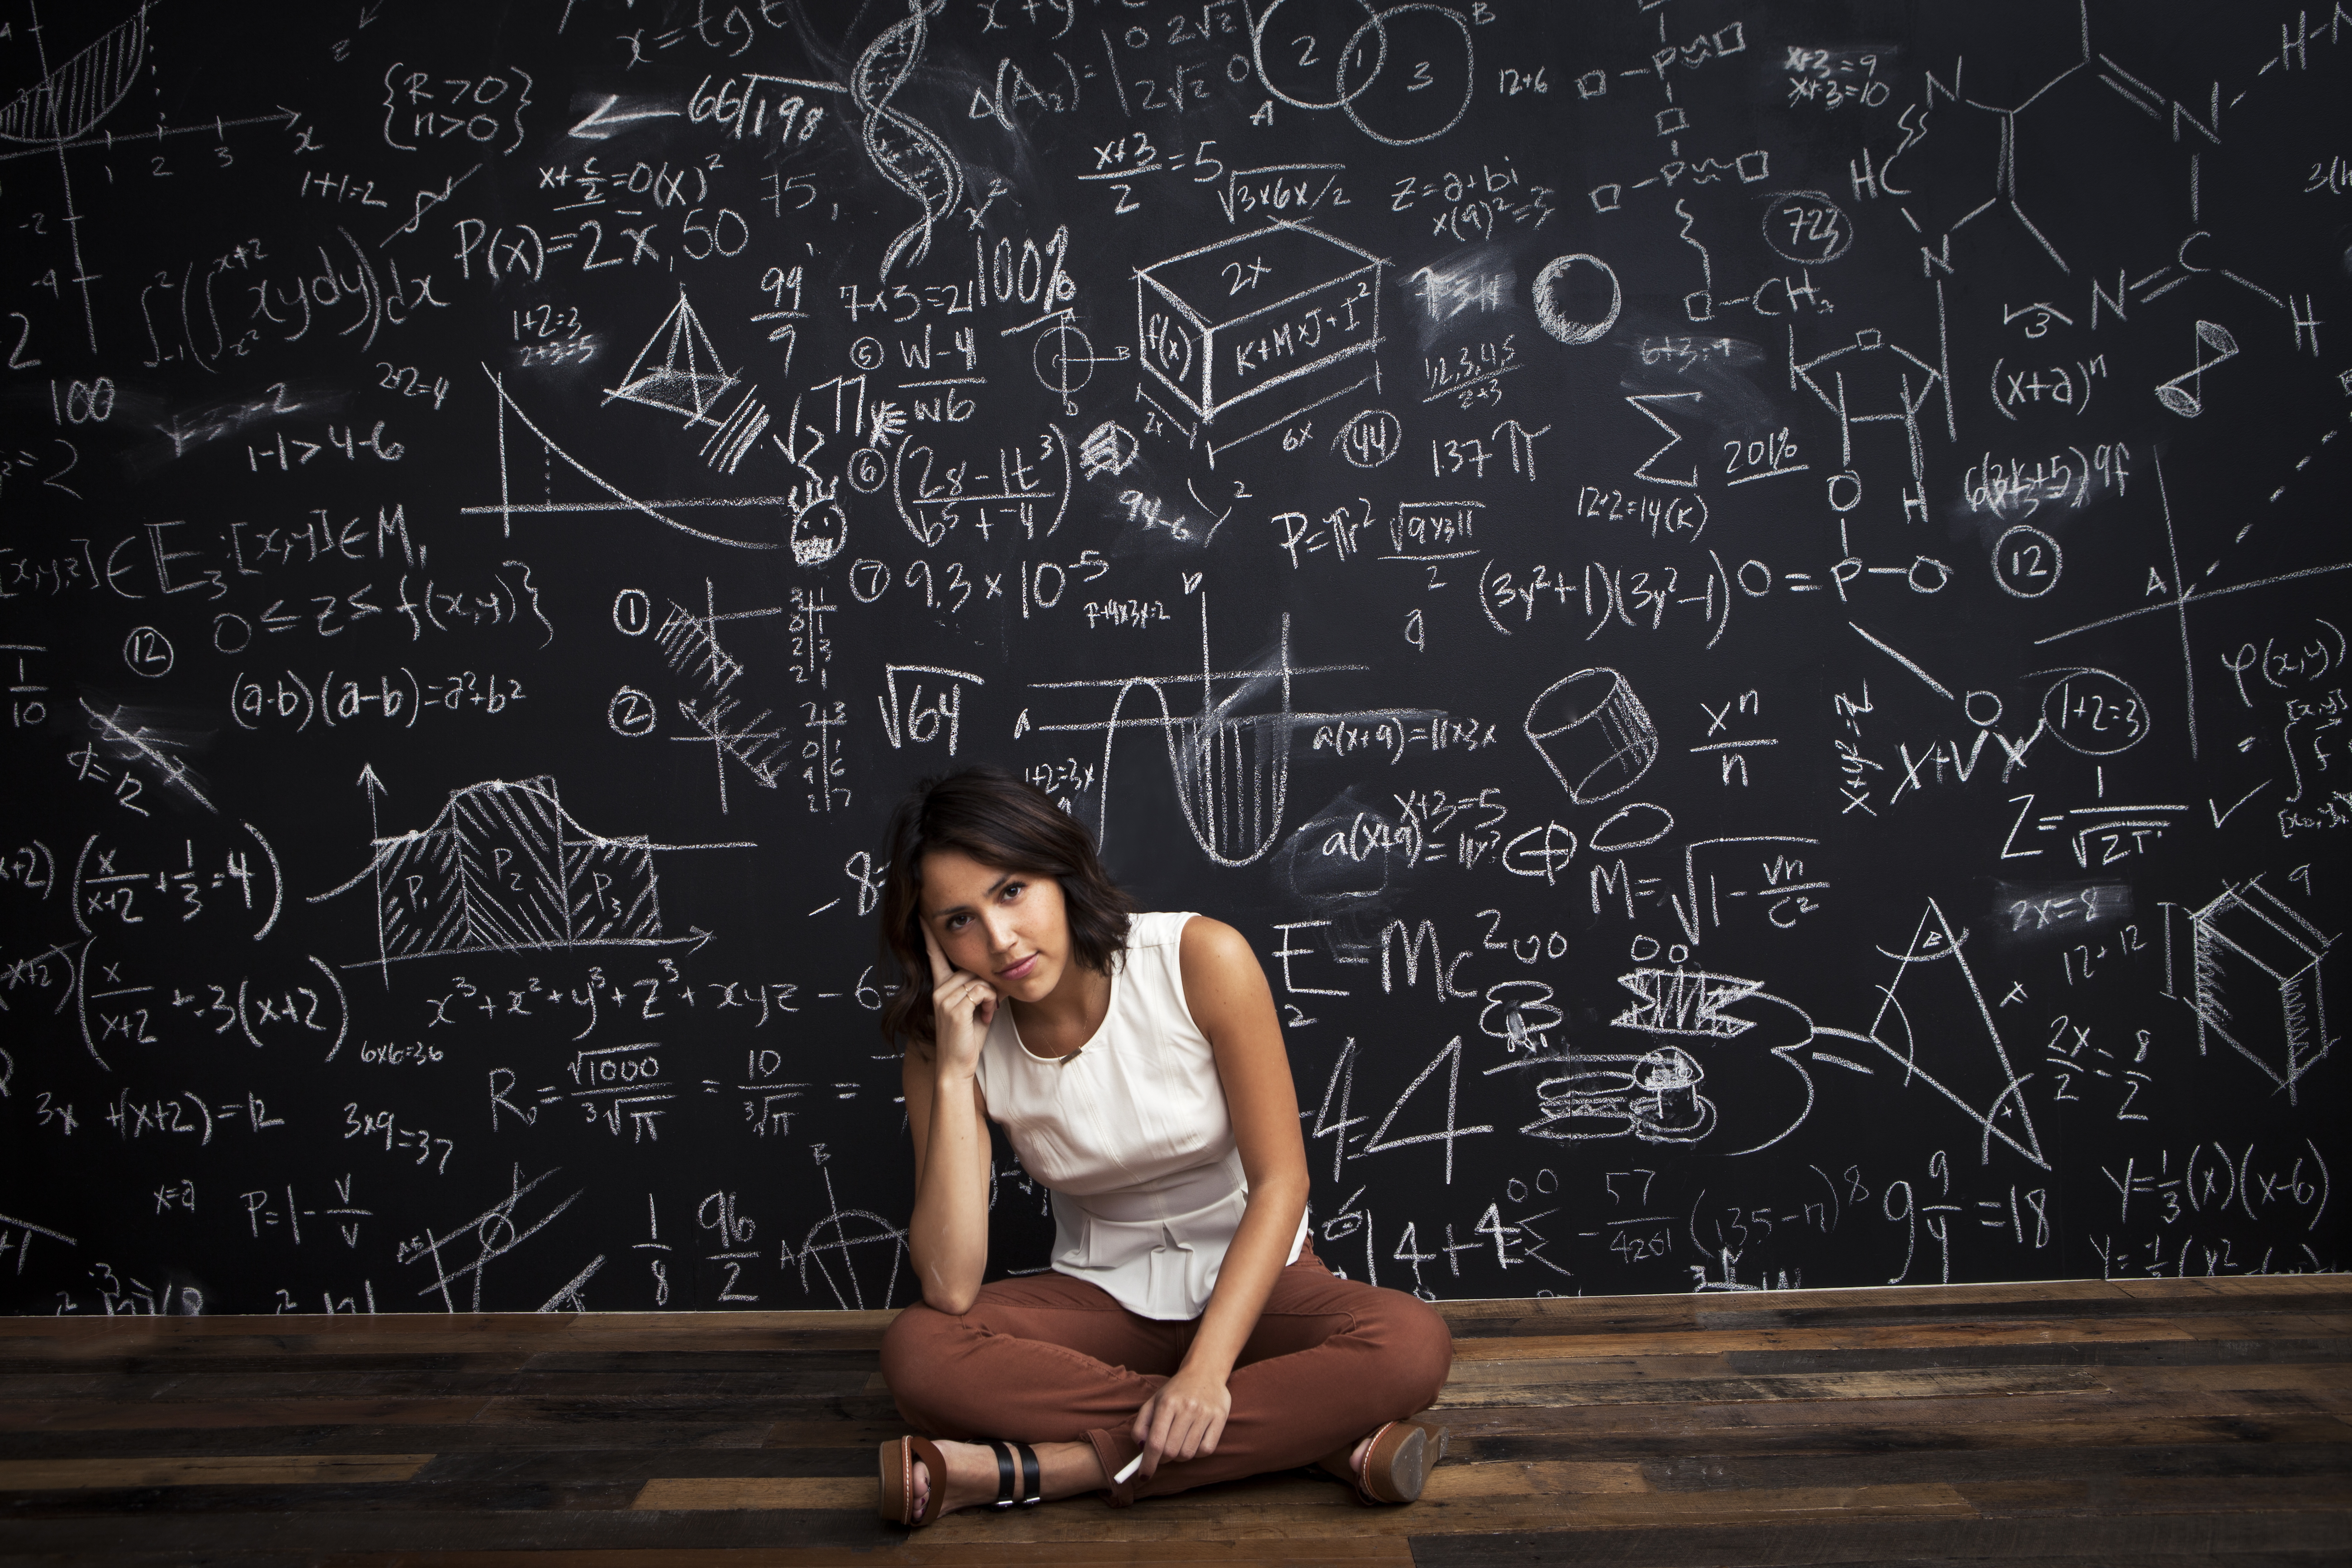 Woman sits cross-legged in front of a blackboard filled with mathematical equations and diagrams